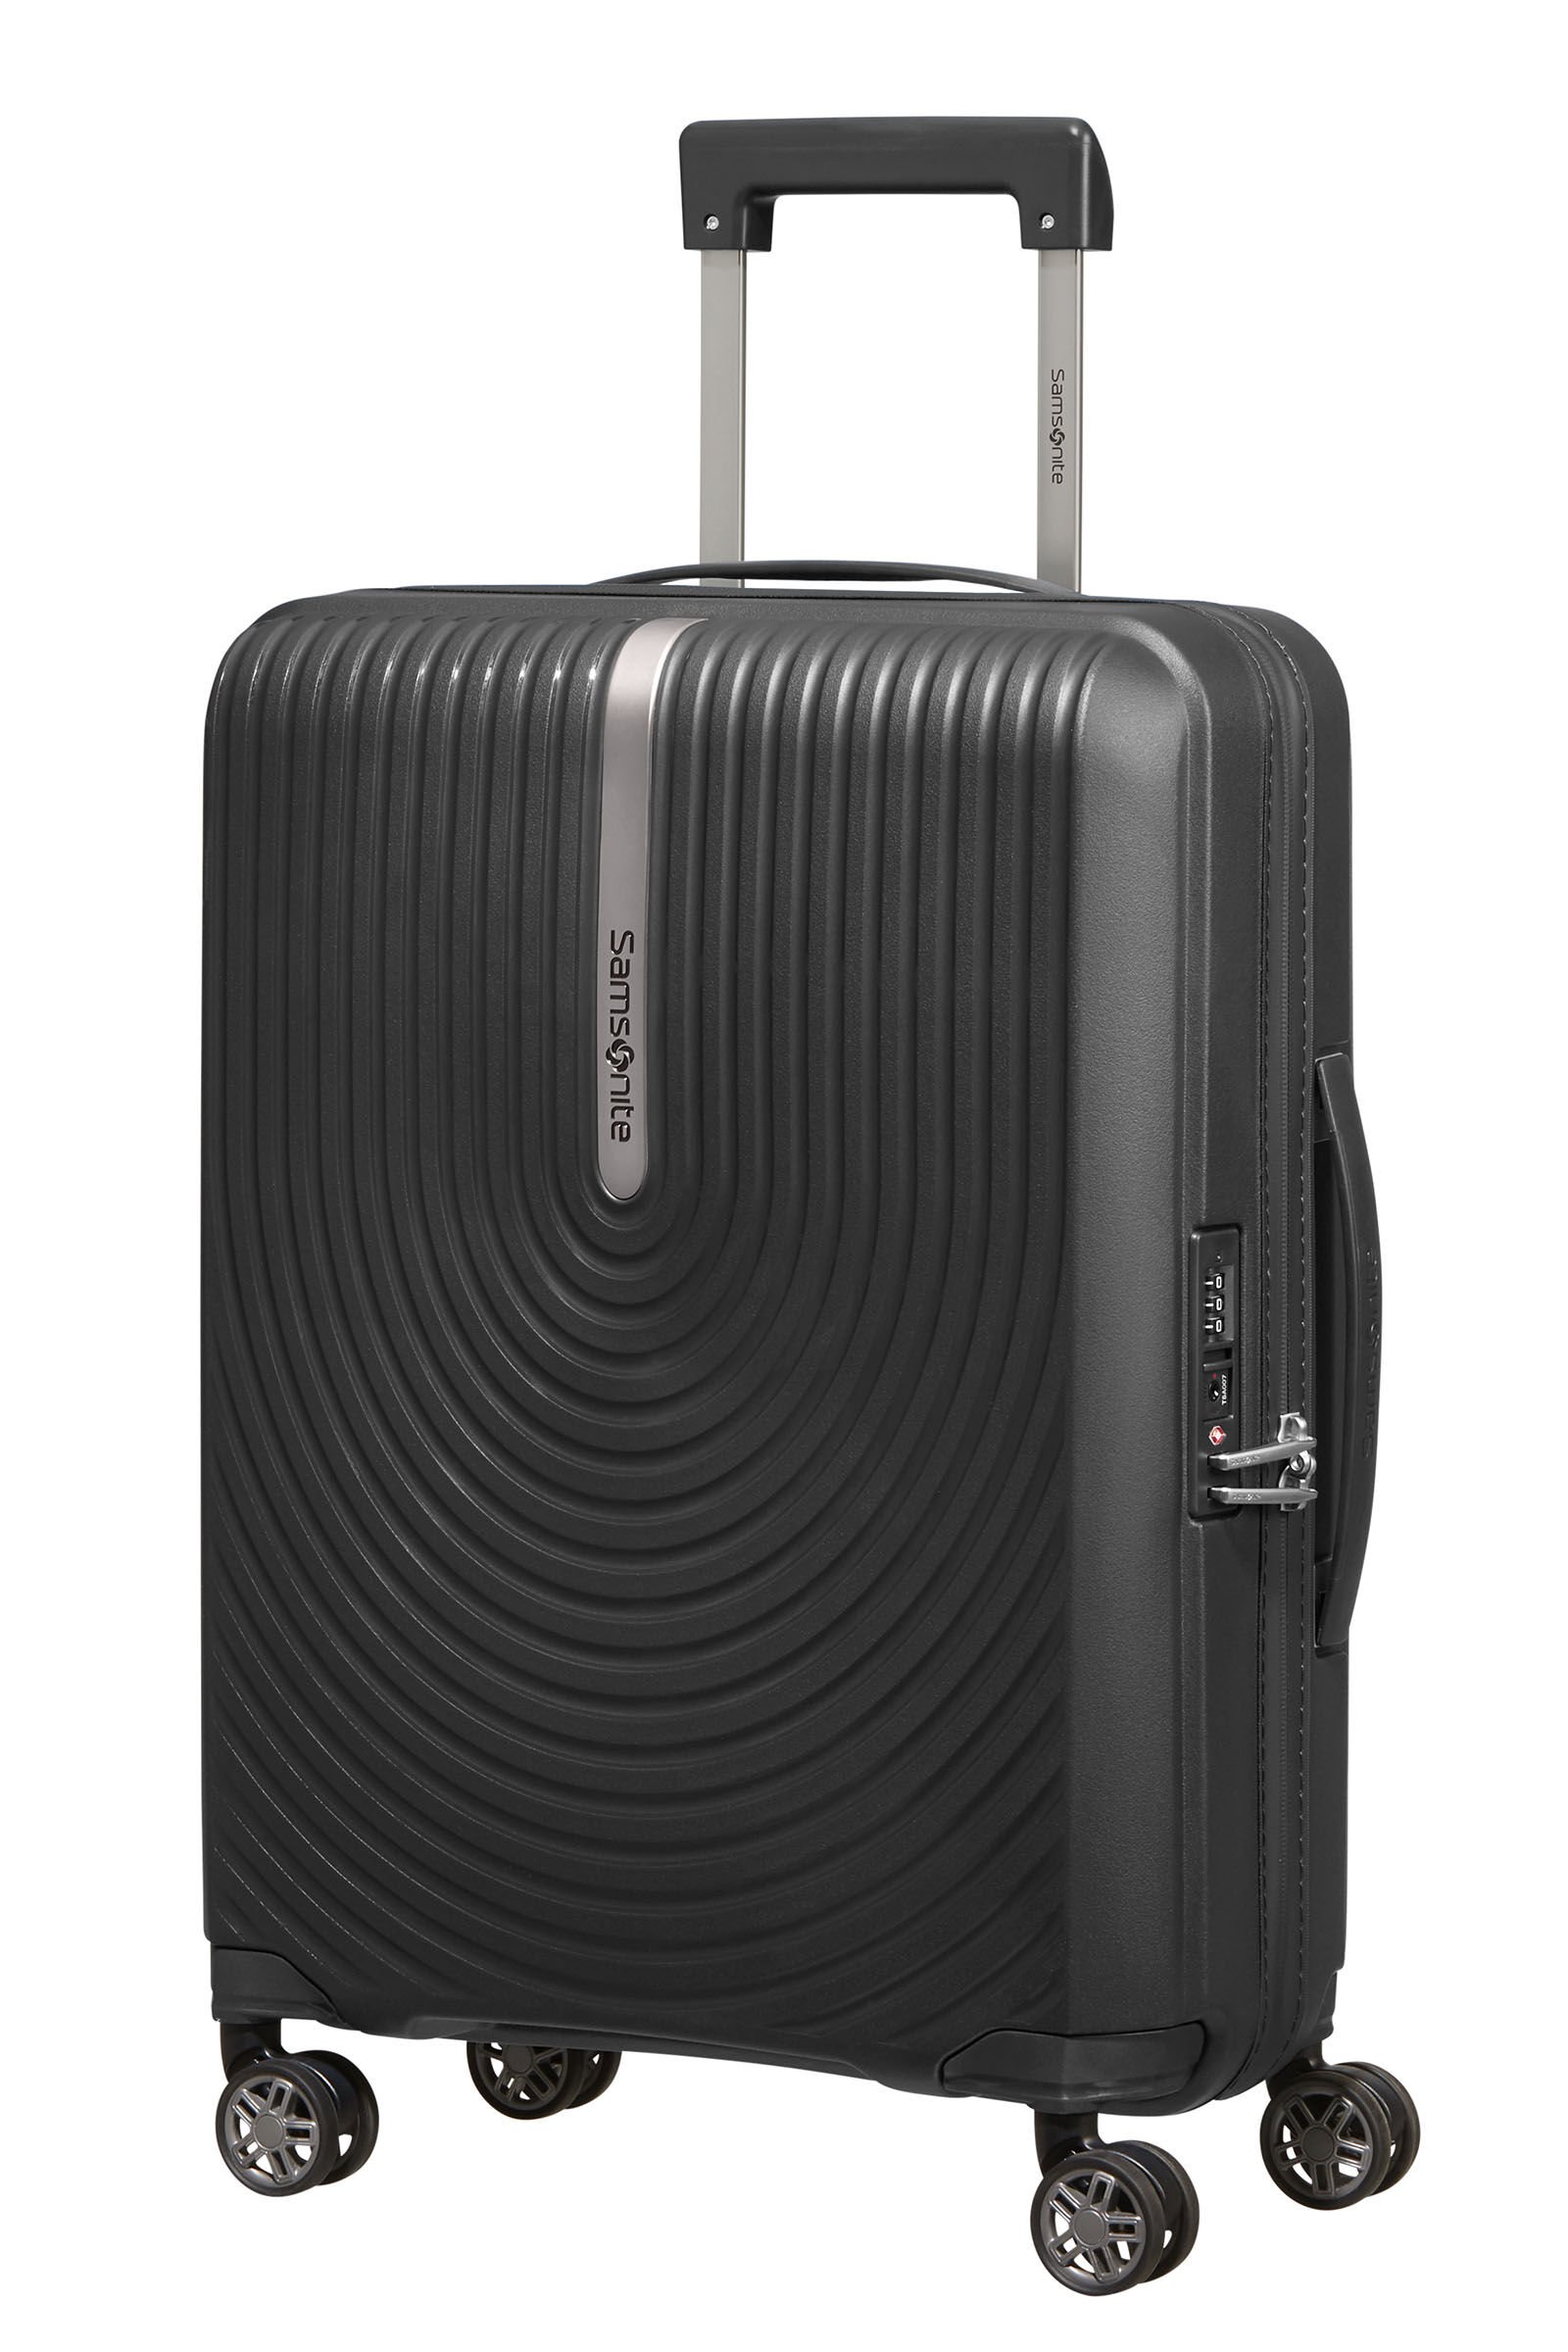 Trolley Bags Cabin Luggage Bags Small Trolley Bags  Samsonite India